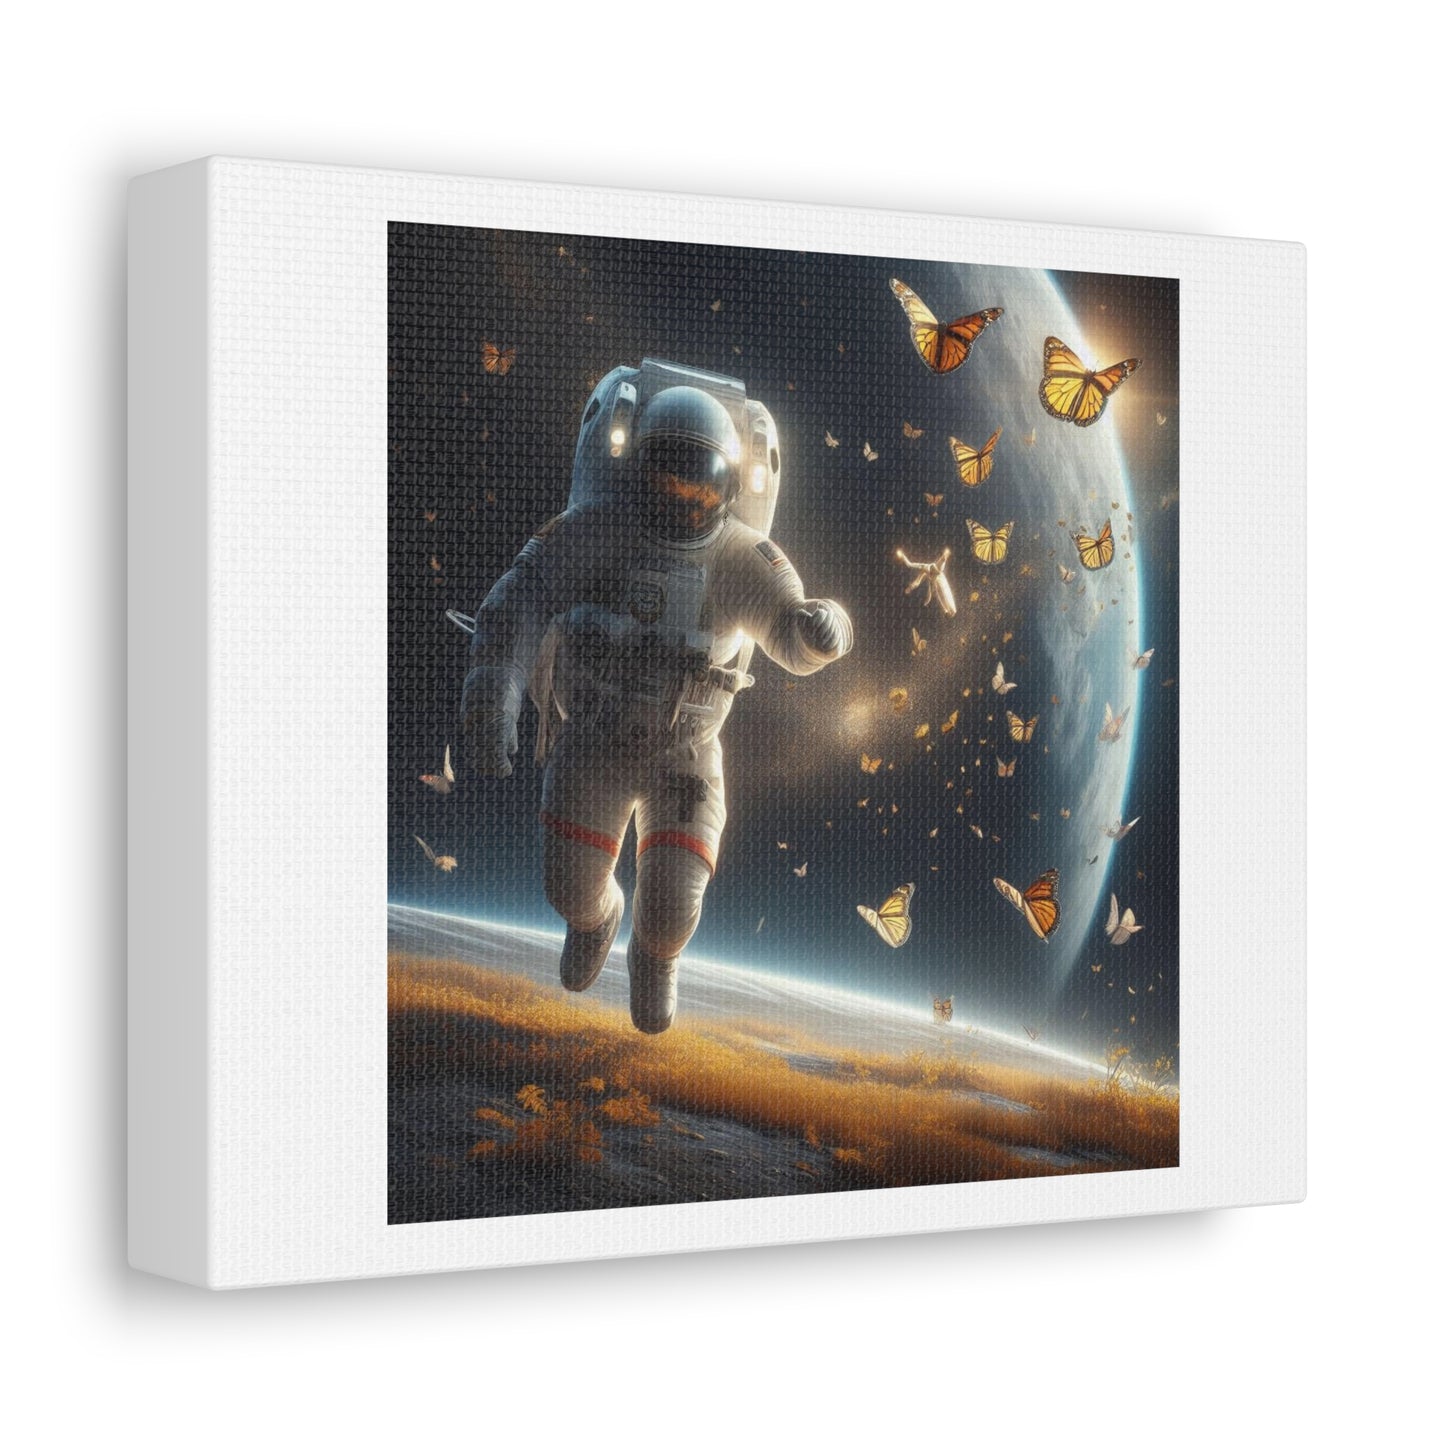 Let's Be Less Alone in the Universe 'Designed by AI' Art Print on Canvas